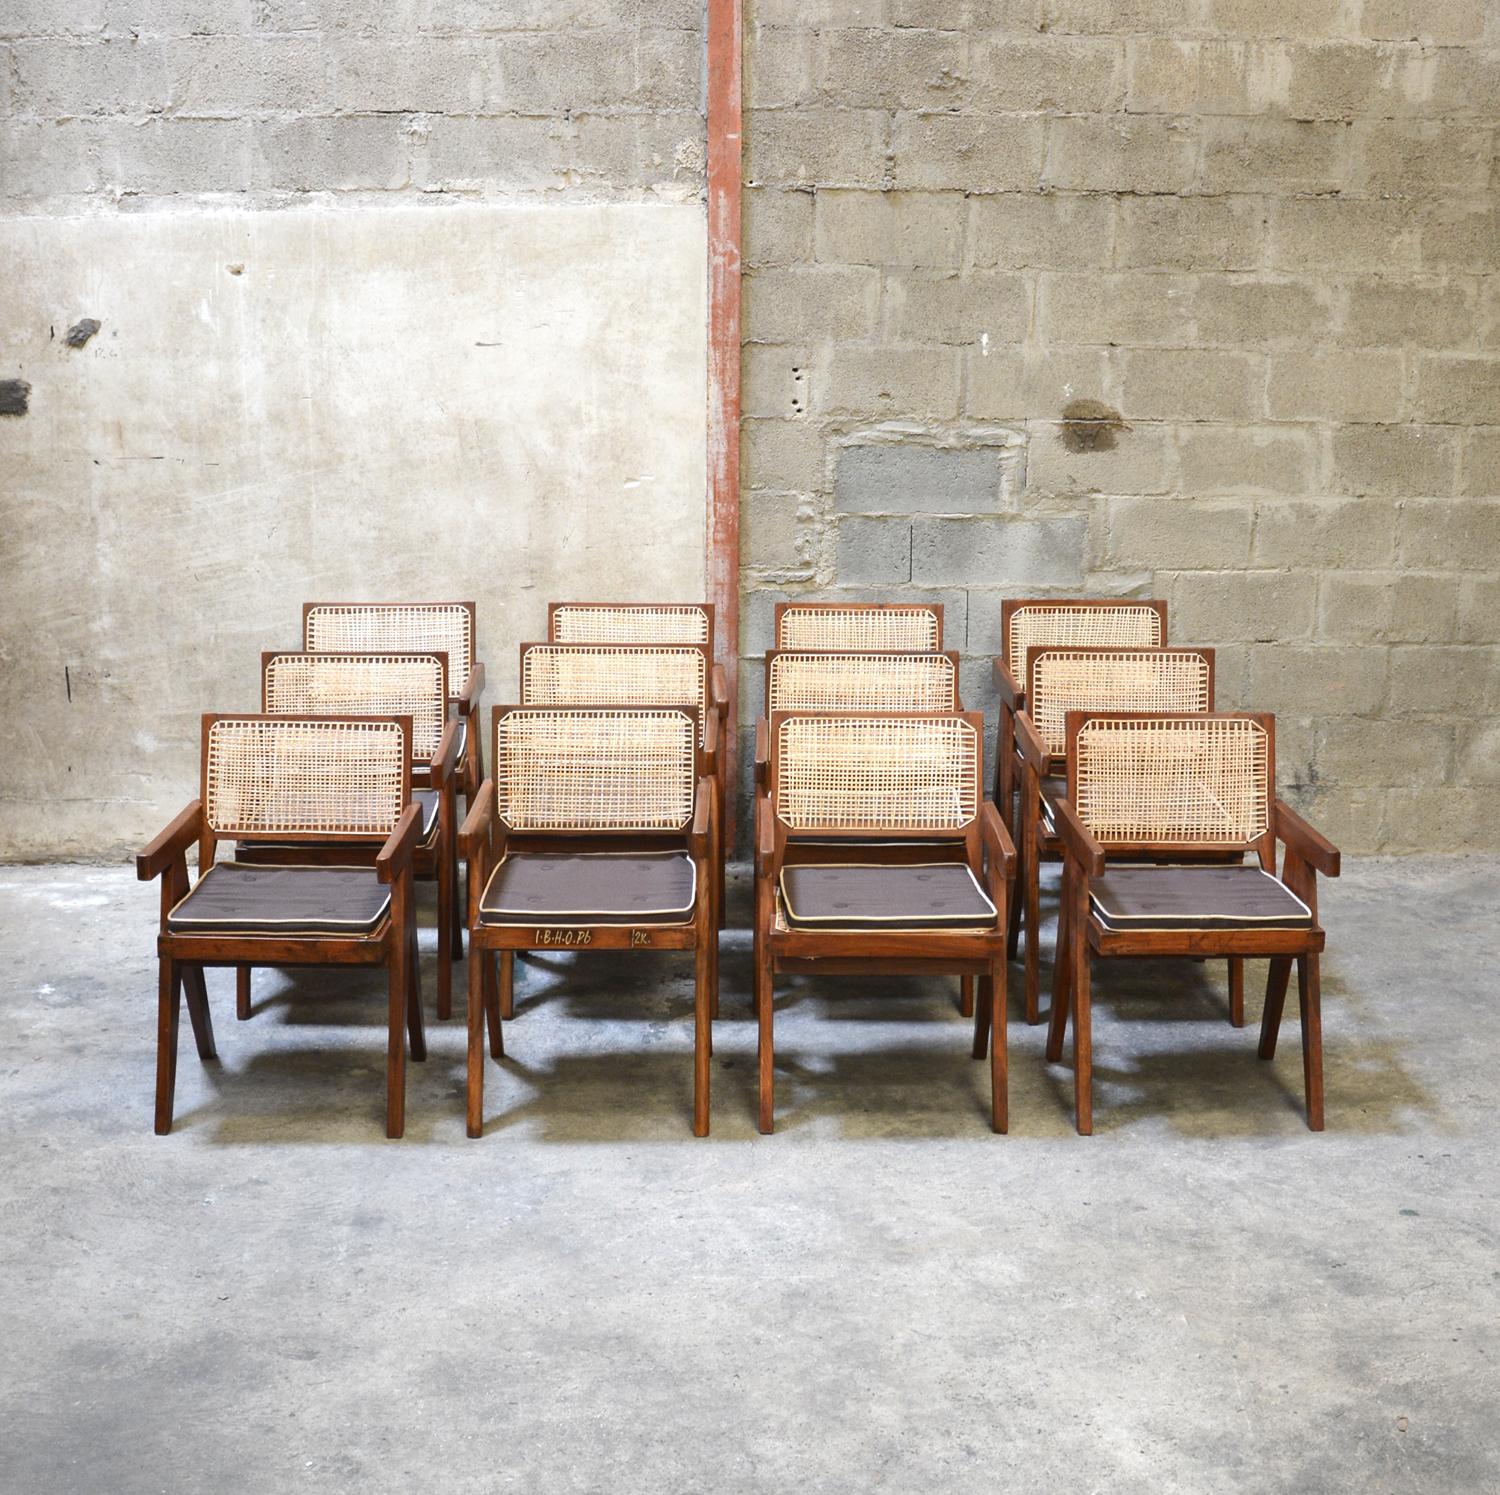 Pierre Jeanneret, set of 12 cane and teak wood office armchairs designed for an administrative building in Chandigarh, India. Back attached to the seat. Teak, woven cane and upholstered new seat cushion featuring cloth covering.

3 Chairs have